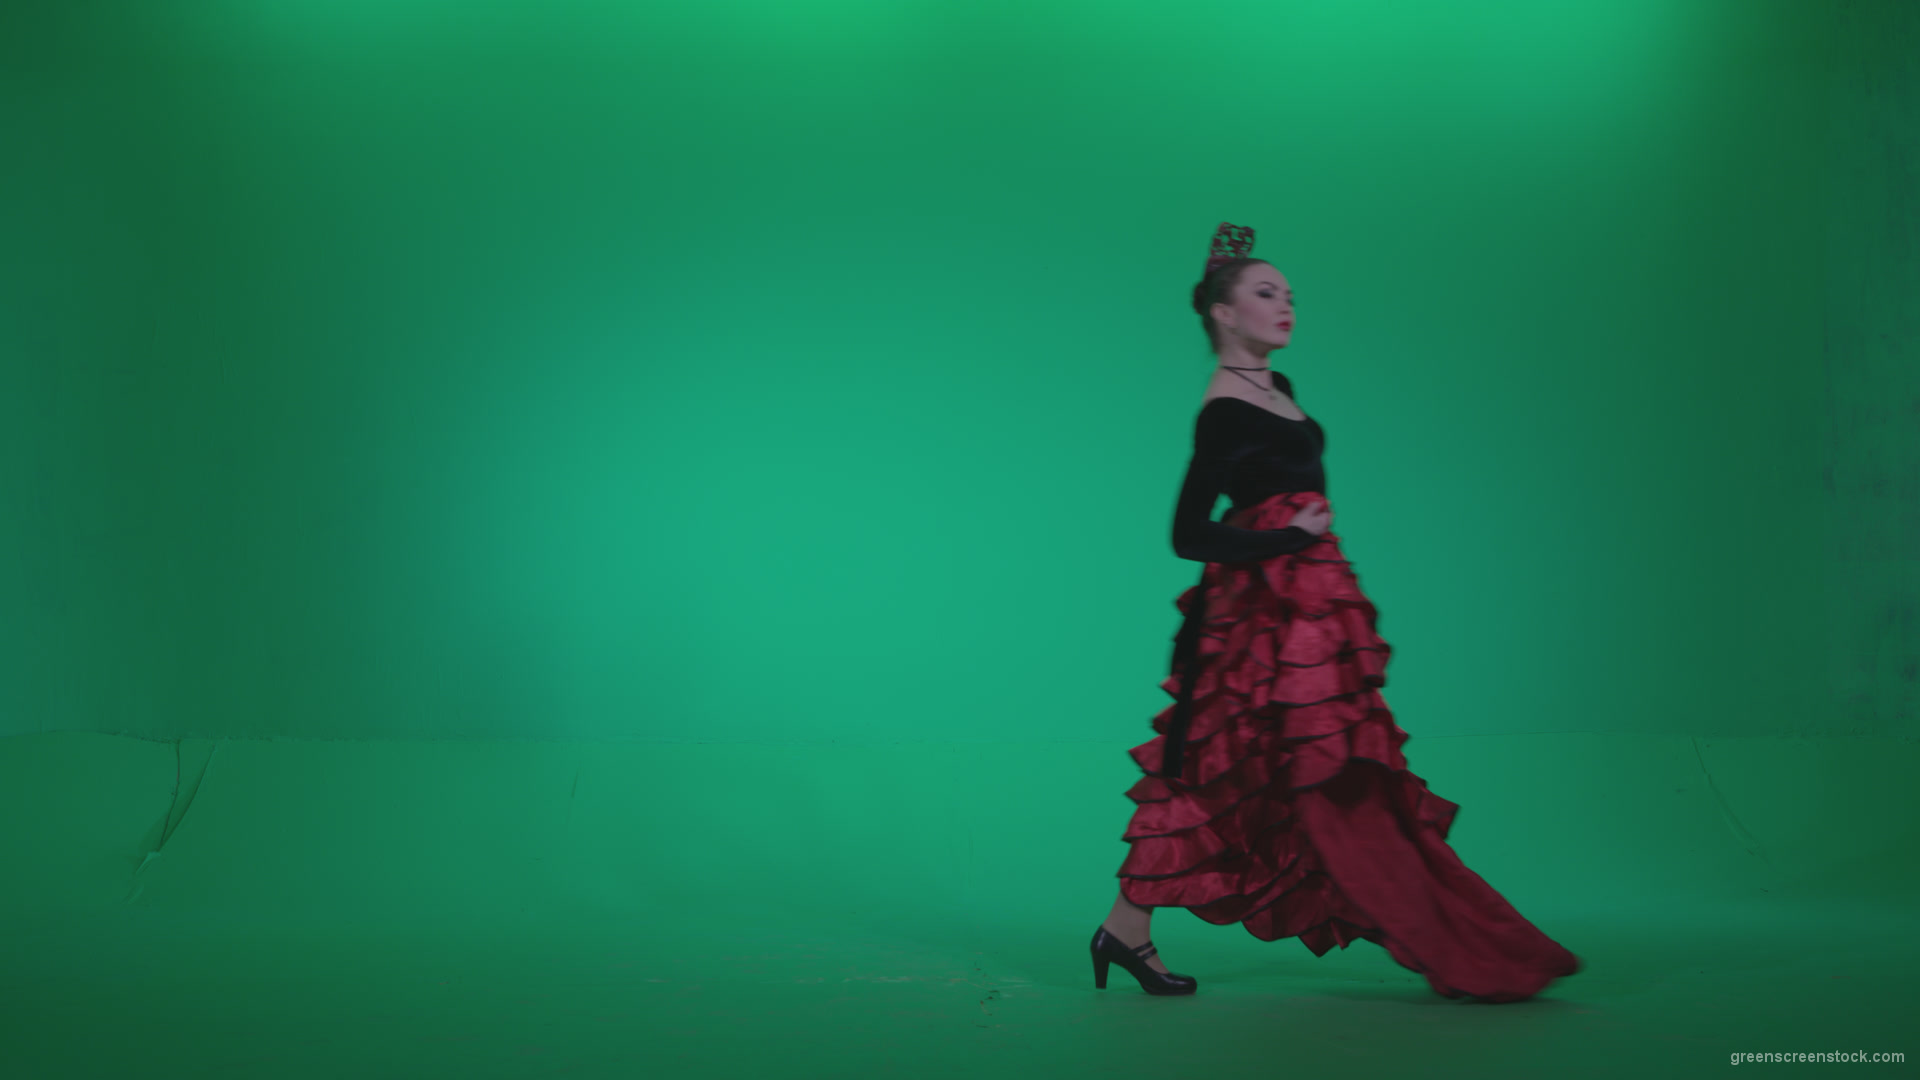 Flamenco-Red-and-Black-Dress-rb7-Green-Screen-Video-Footage-1_009 Green Screen Stock